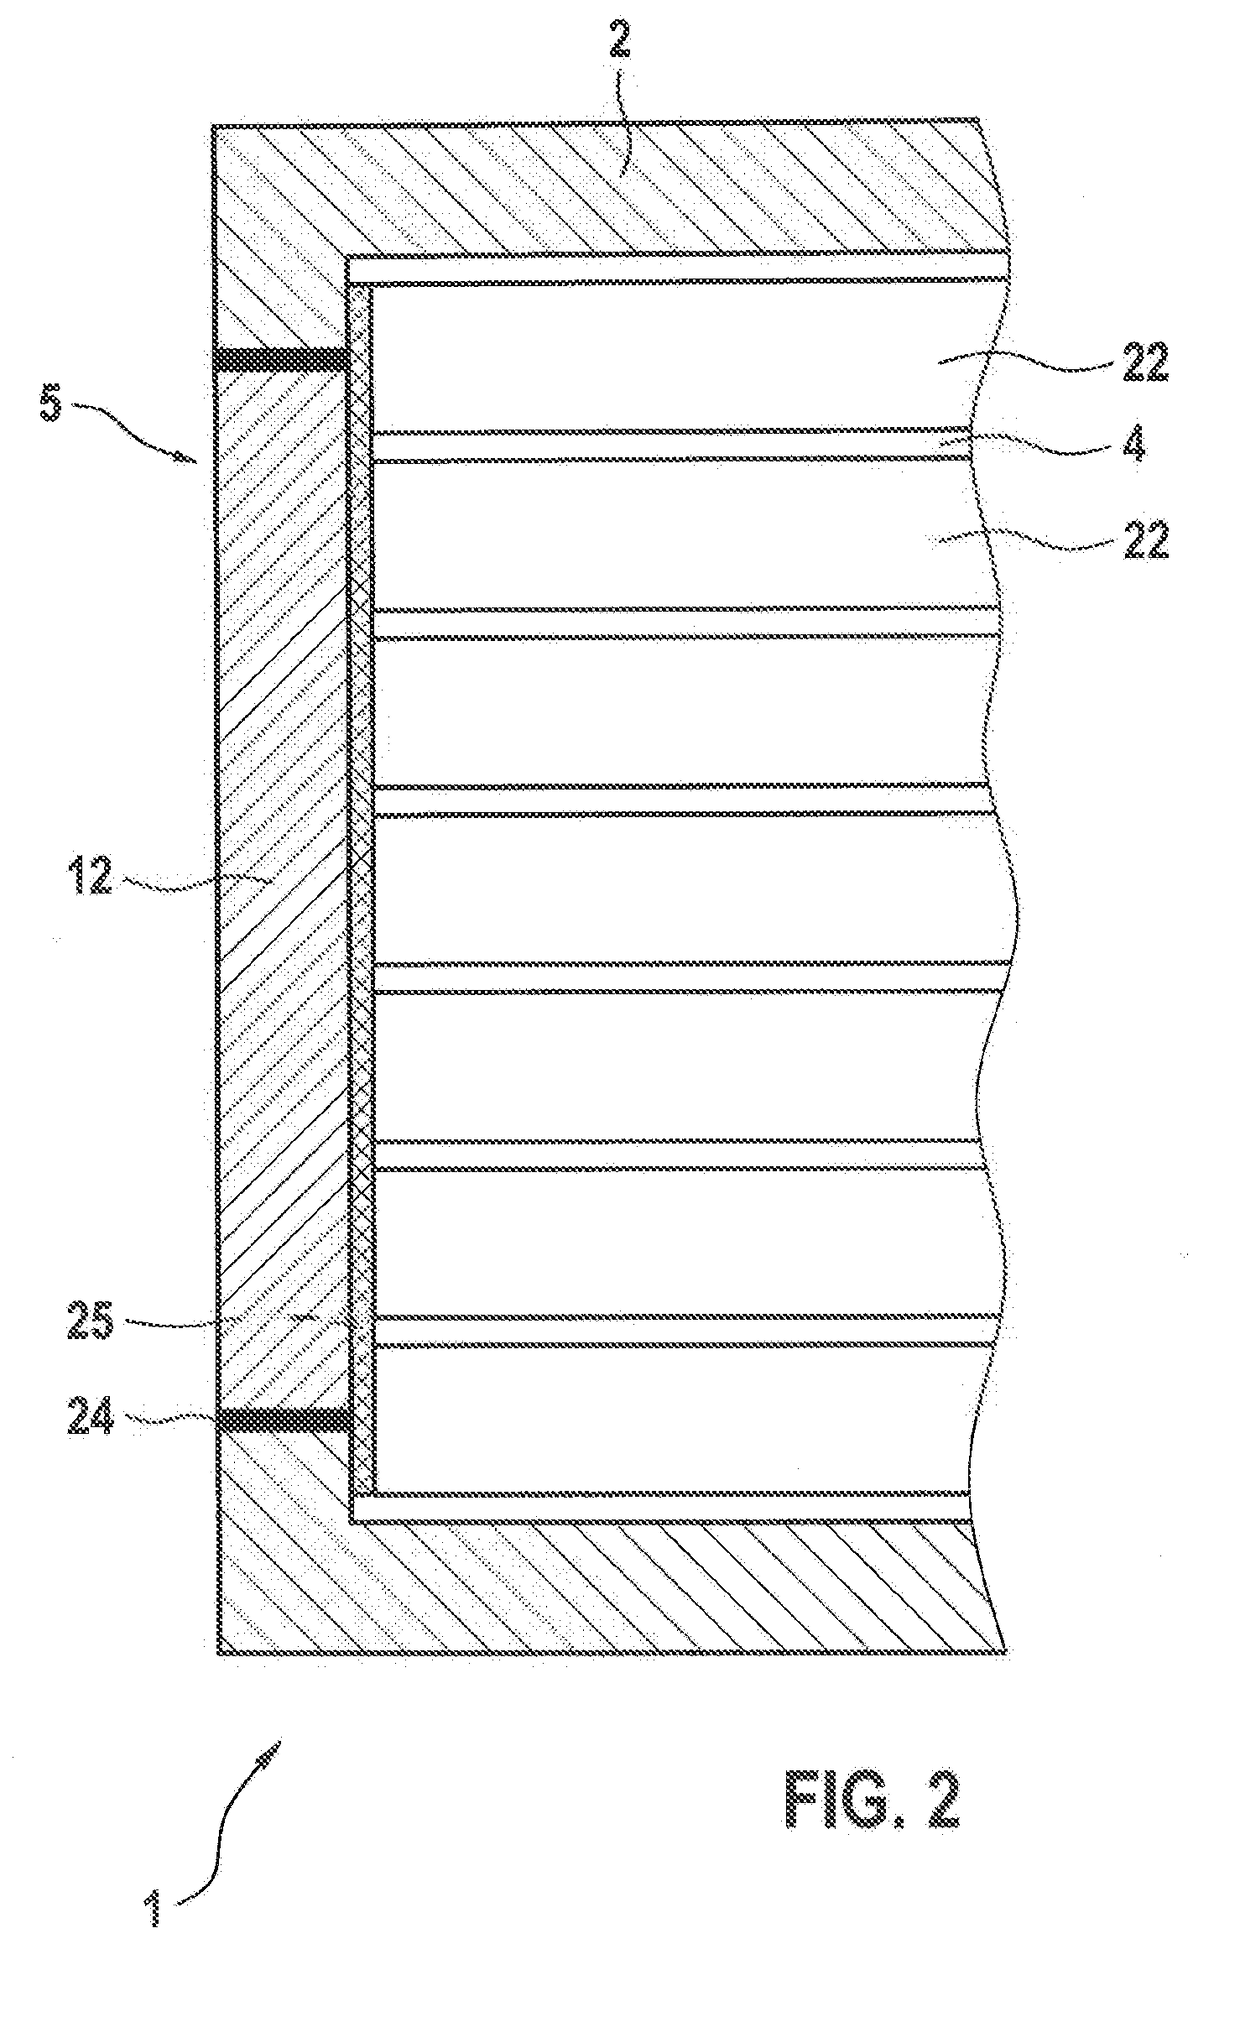 Battery module, method for the production thereof, and battery